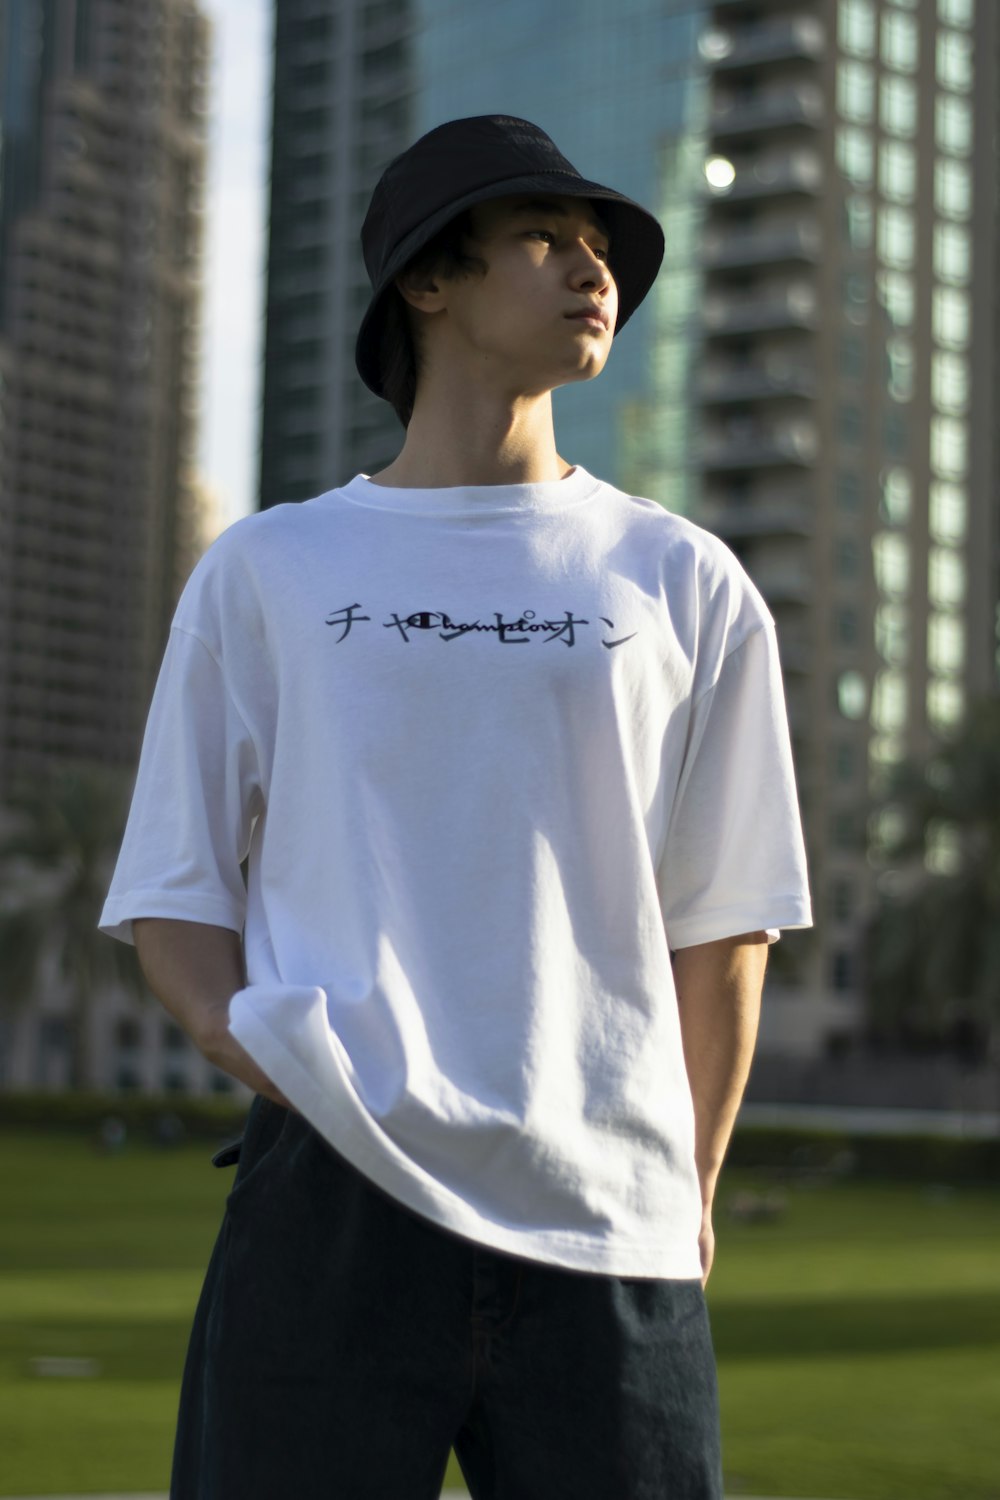 man in white crew neck t-shirt and black pants standing on green grass field during